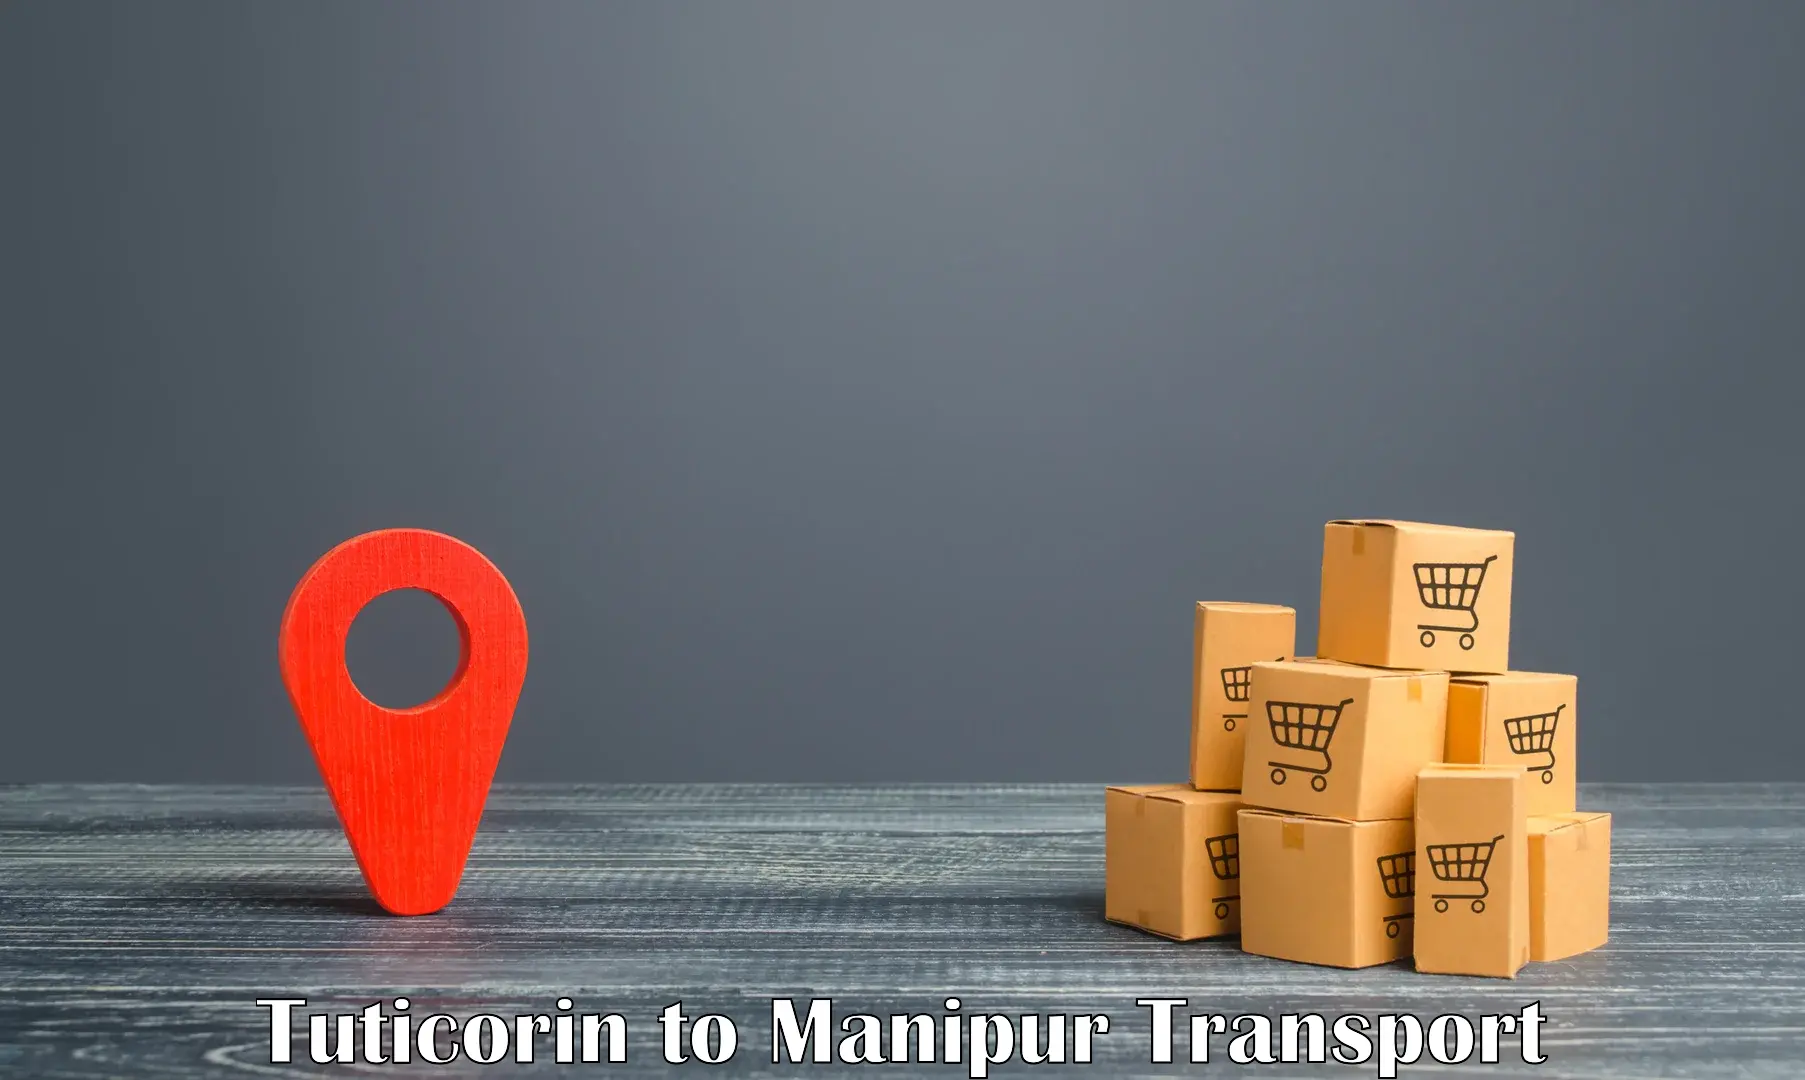 Commercial transport service Tuticorin to Manipur